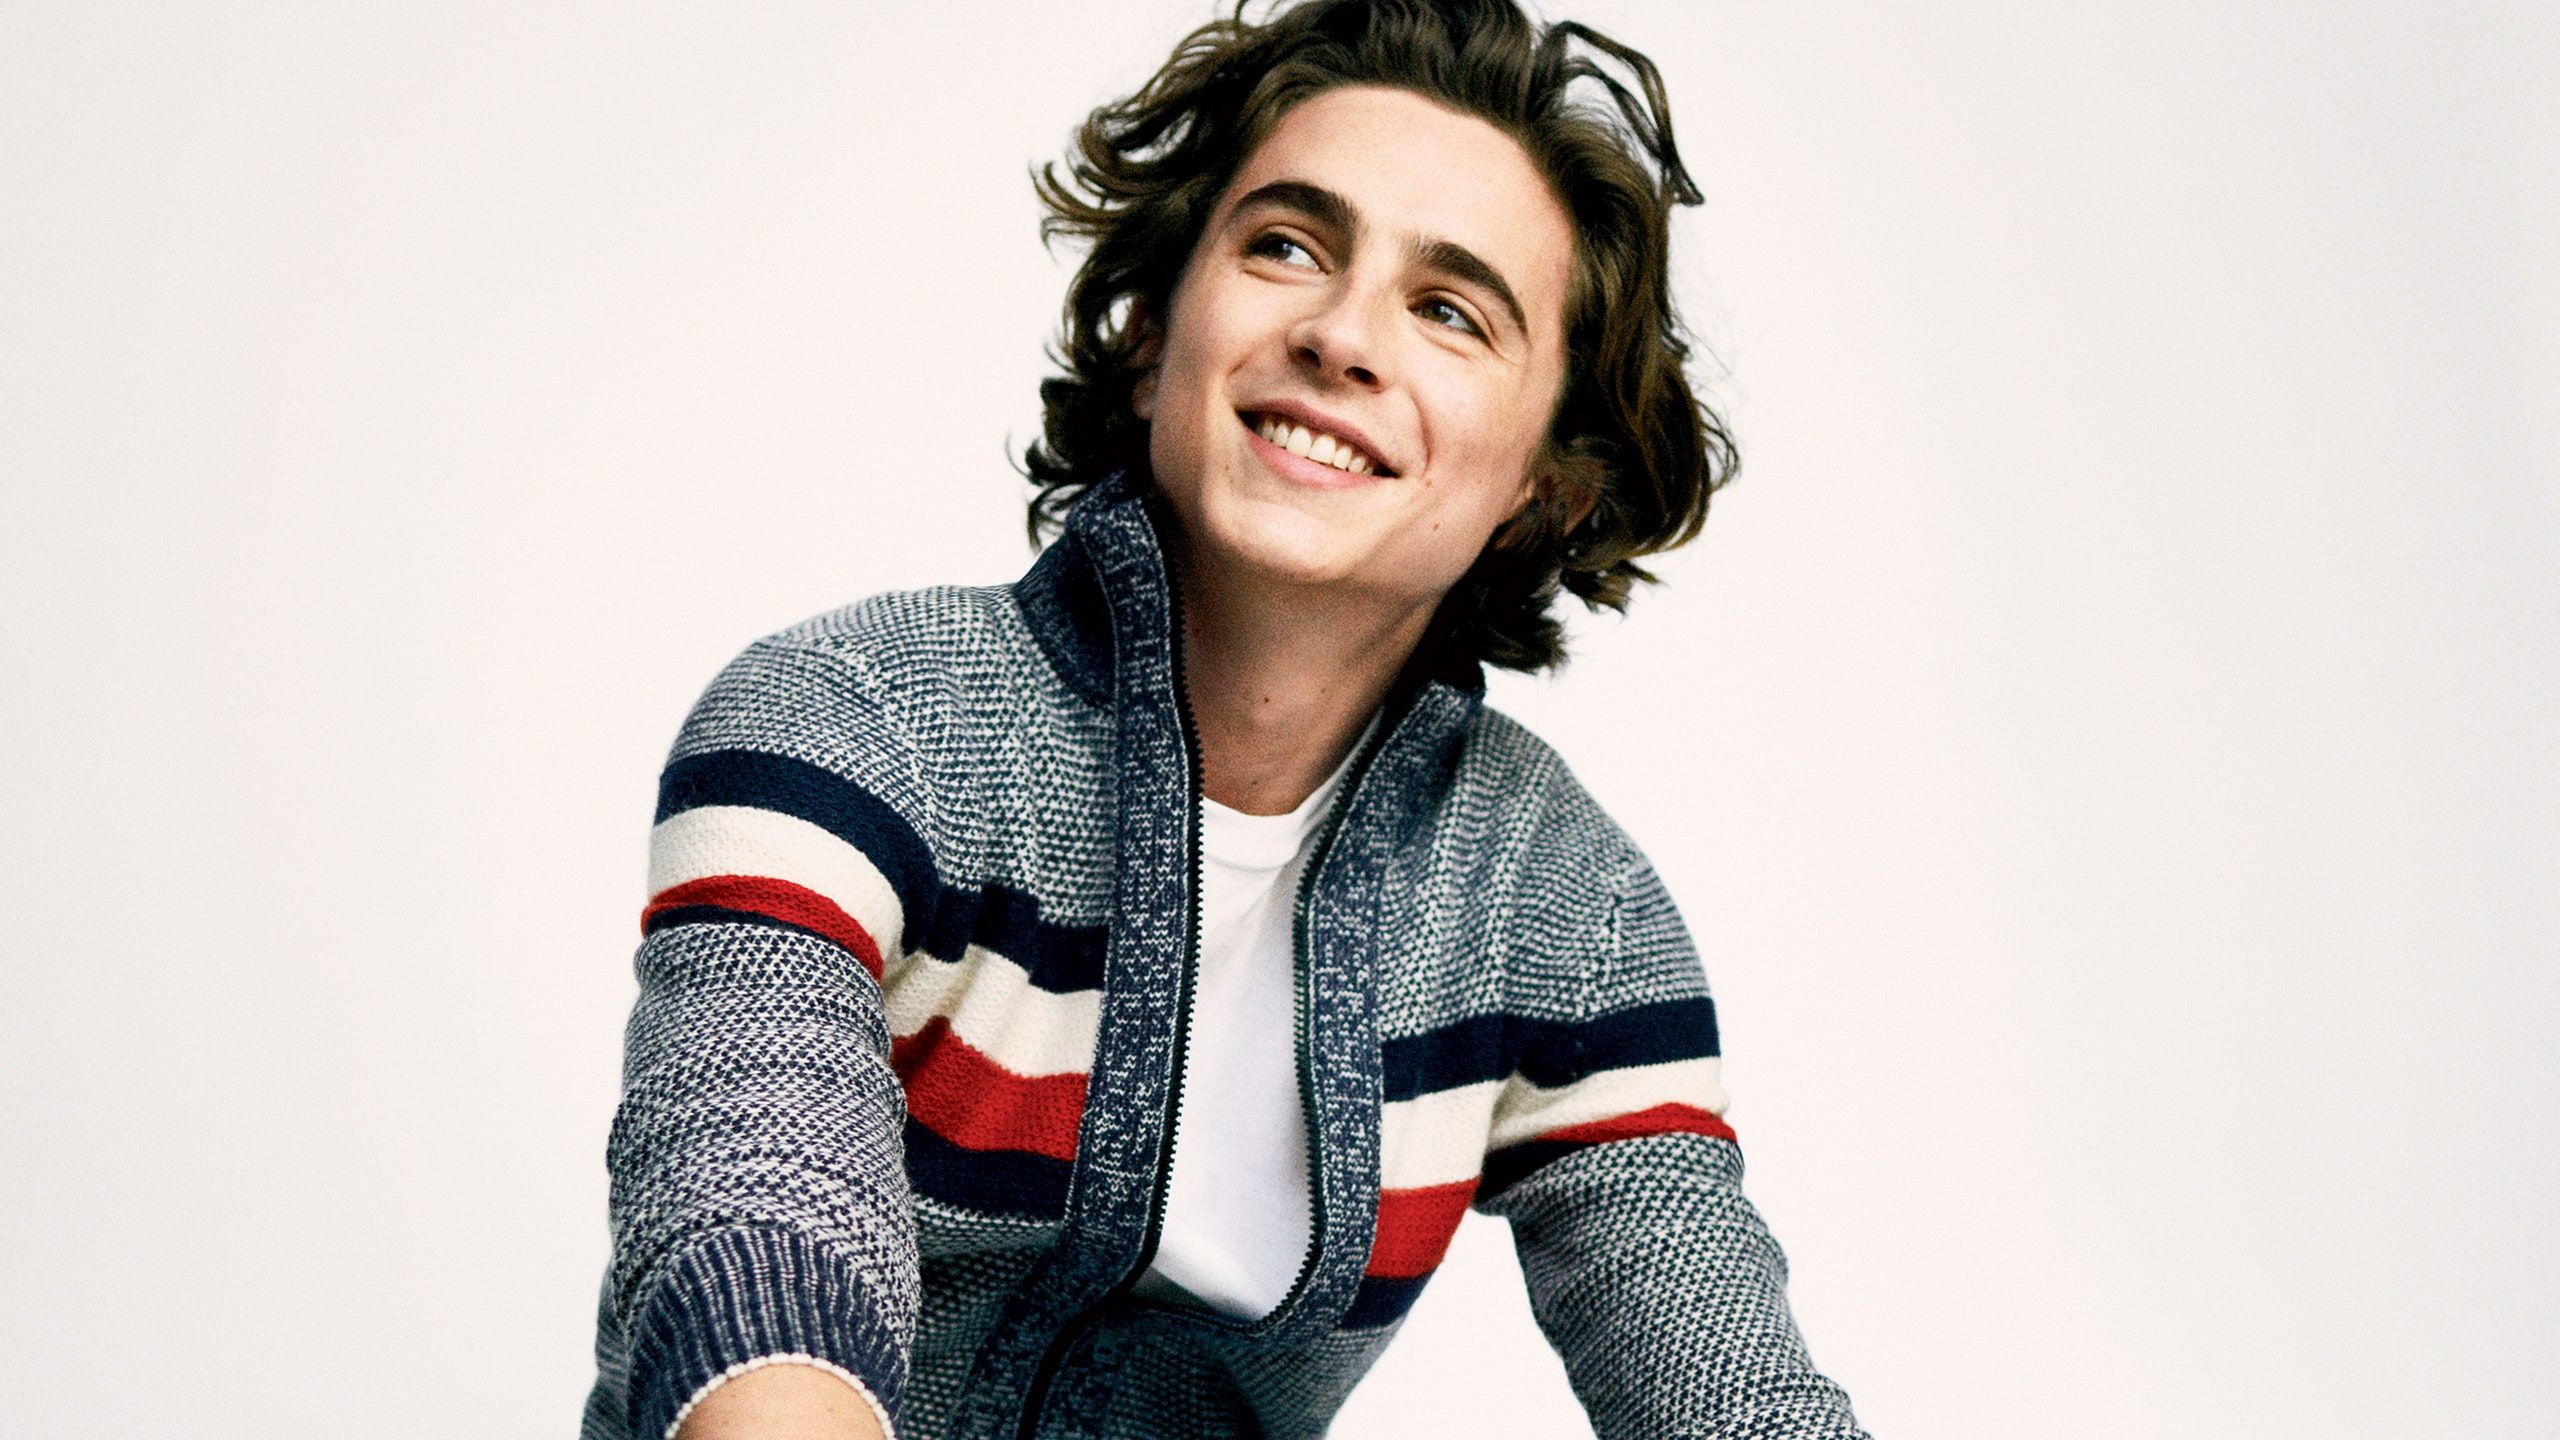 Timothée Chalamet on Paparazzi Catching His Kiss with Selena Gomez, 'Call Me by Your Name', and That Peach Scene